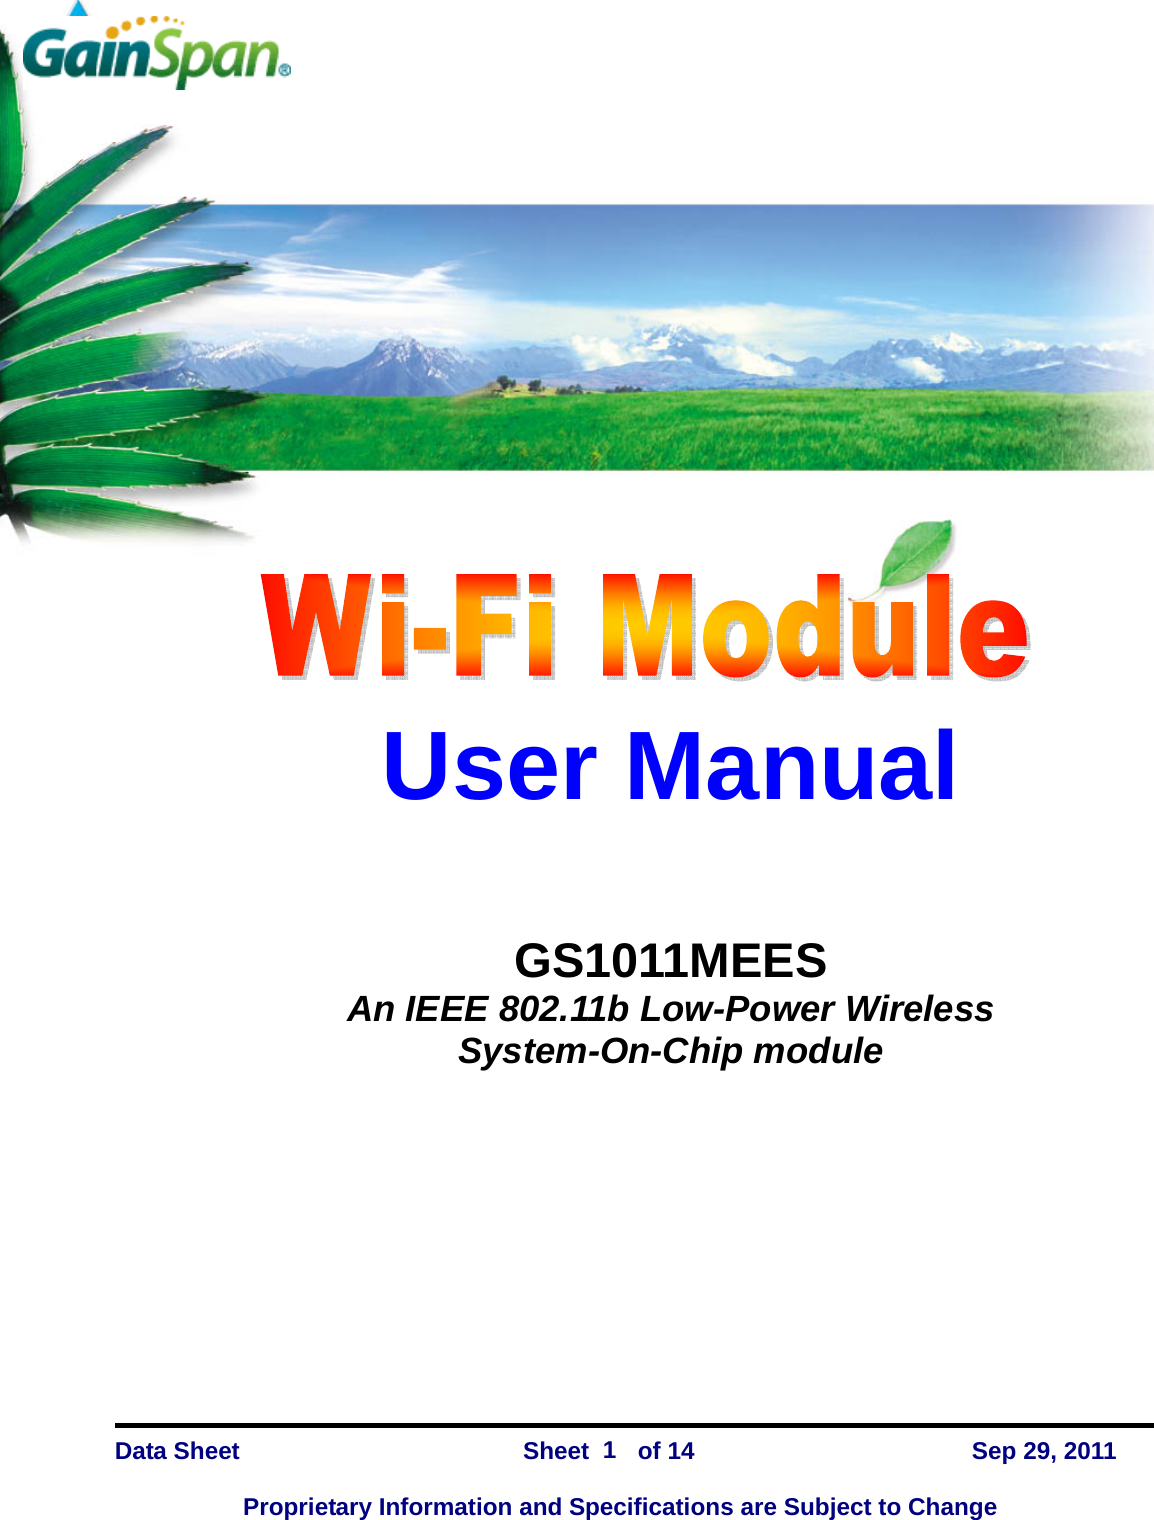   GS1011MEES    Data Sheet                Sheet    of 14      Sep 29, 2011  Proprietary Information and Specifications are Subject to Change 1  User Manual   GS1011MEES An IEEE 802.11b Low-Power Wireless System-On-Chip module 